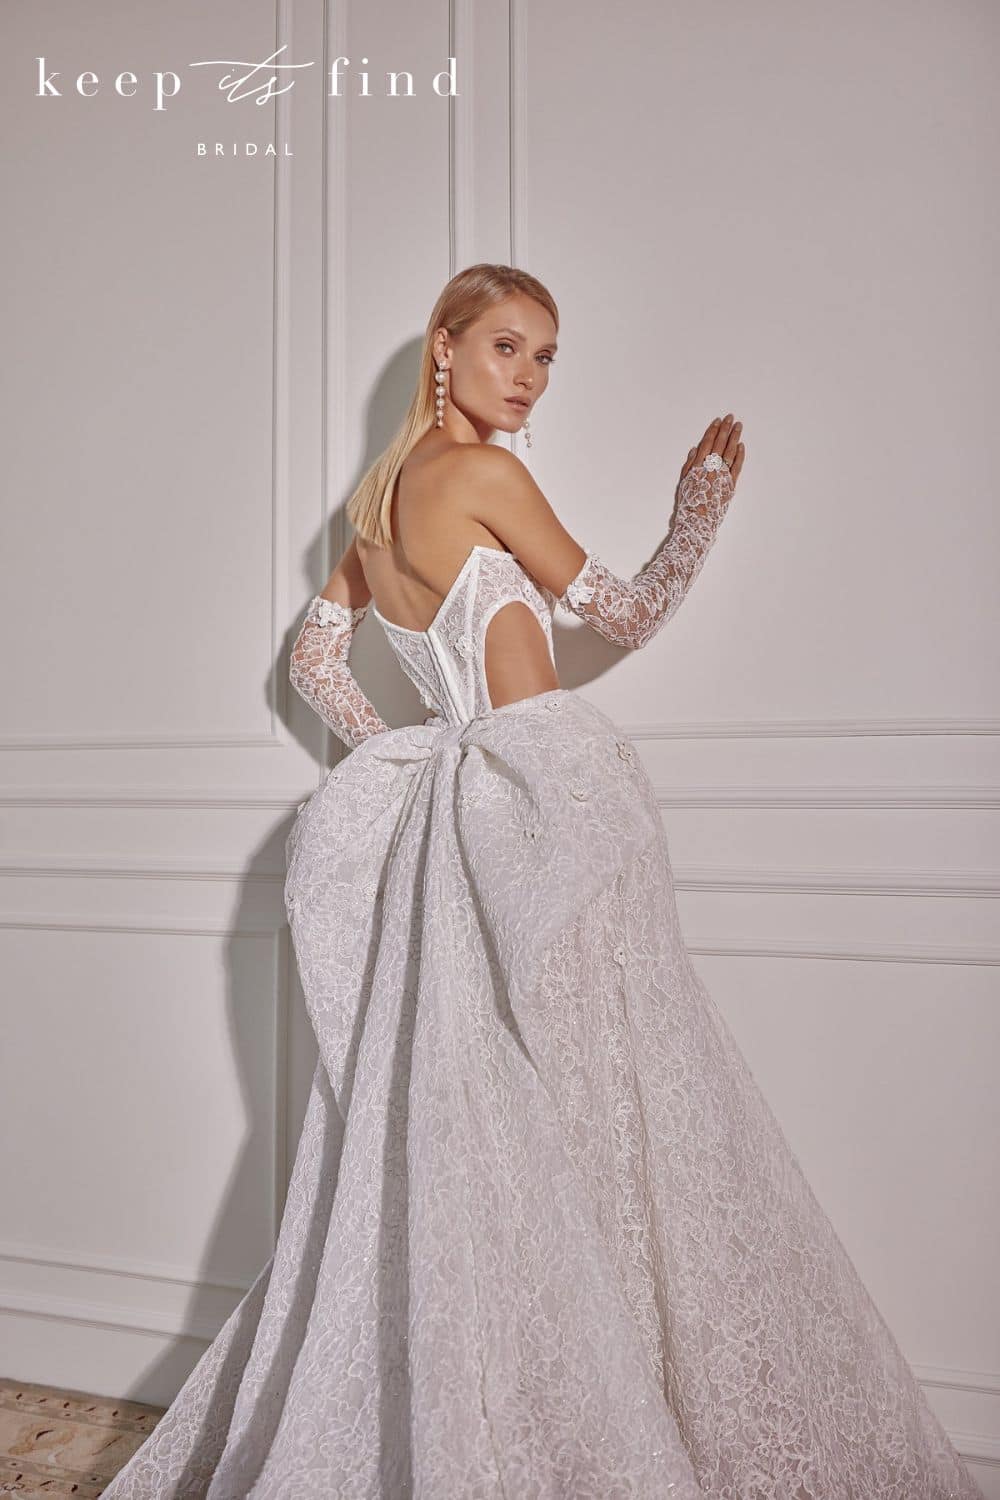 Bride looking over shoulder in strapless lace wedding dress with detachable skirt with bow details